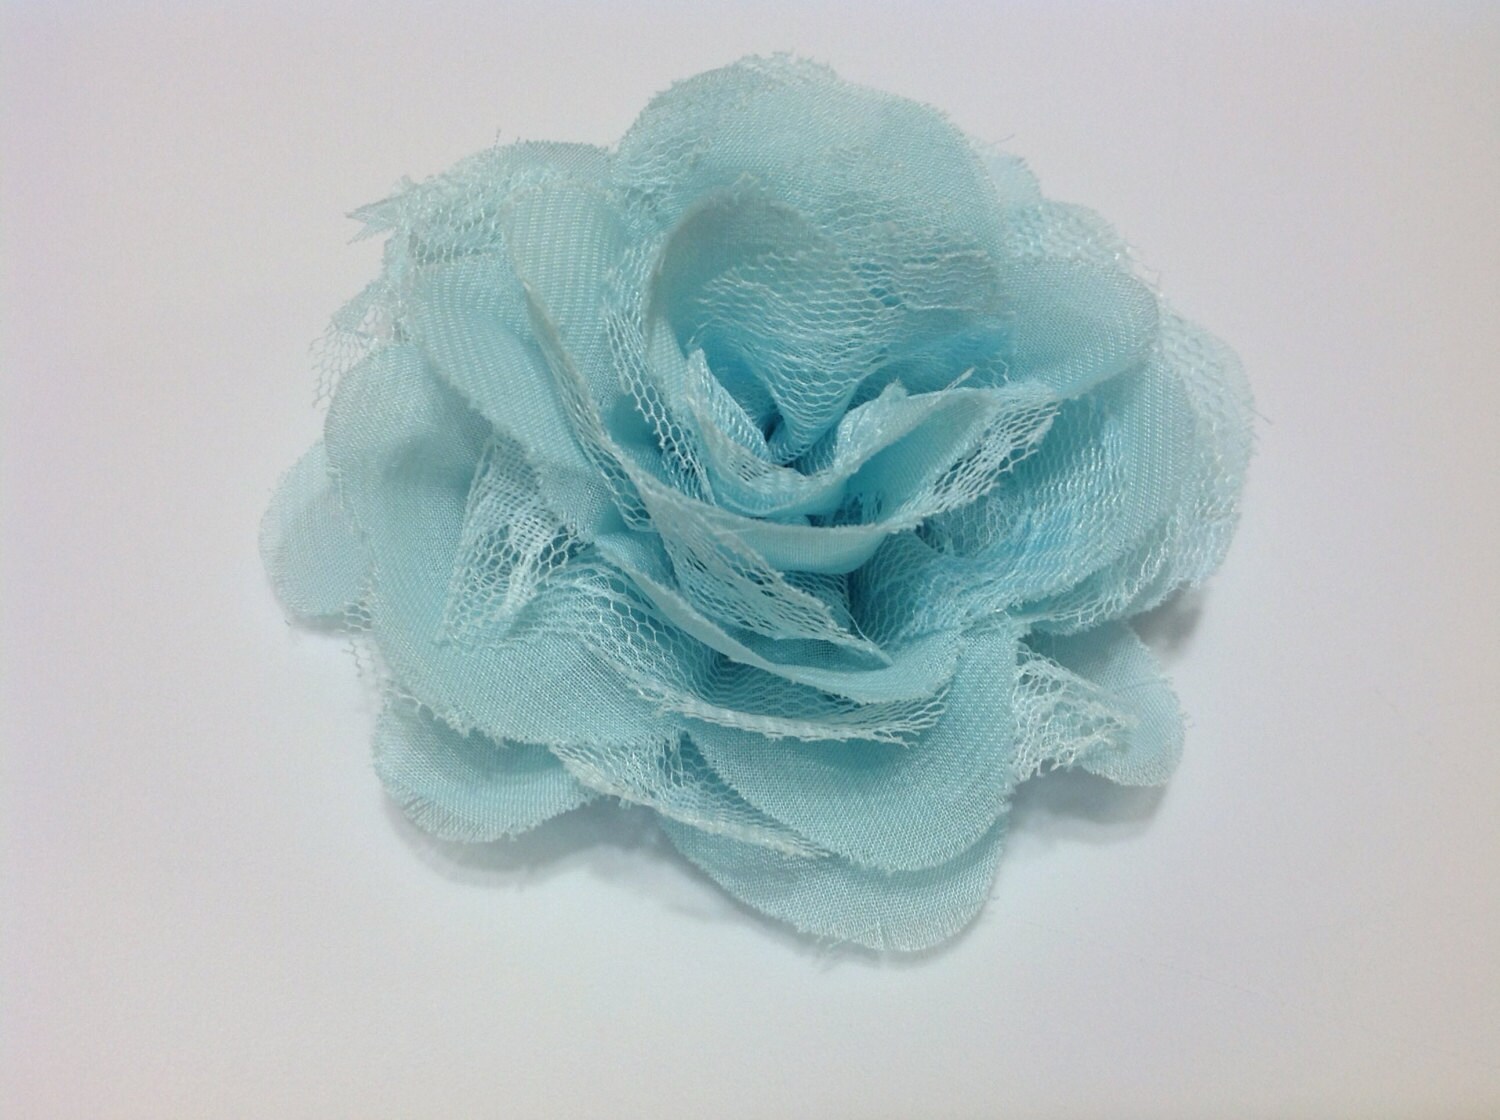 Light blue 3.75 inch lace chiffon flower by BoutiqueSuppliesCo